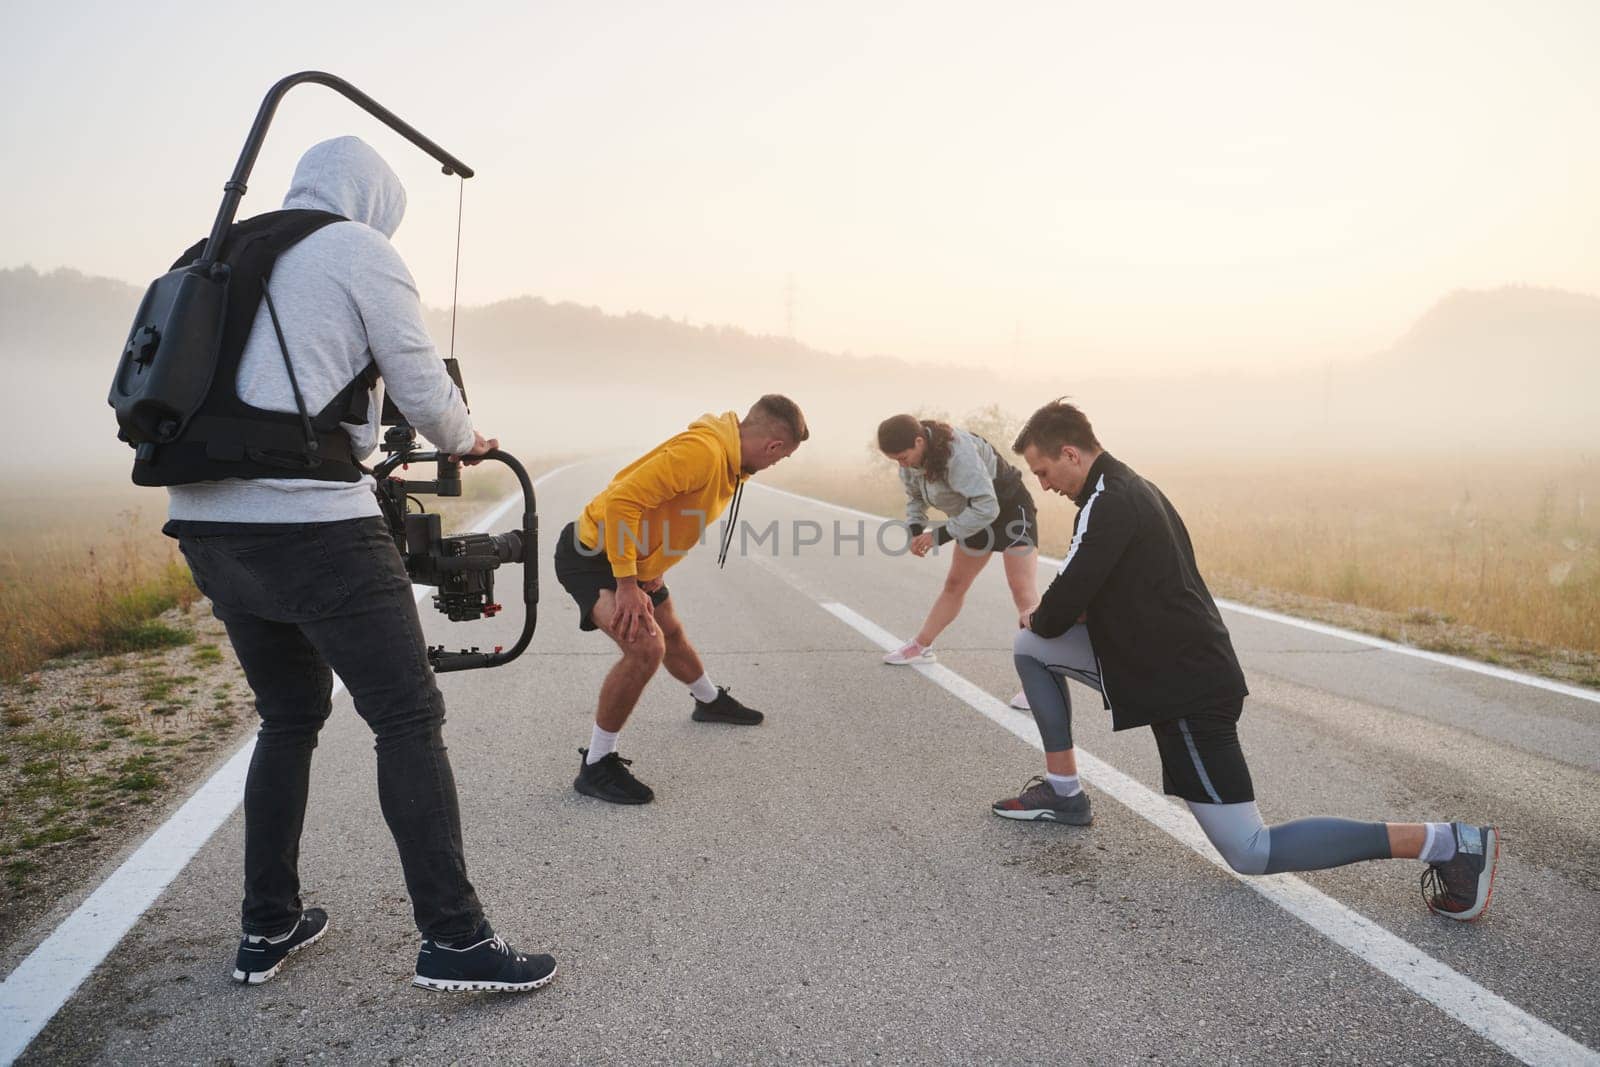 Behind the Lens: Videographer Captures Athletes Warming Up for Morning Run. by dotshock